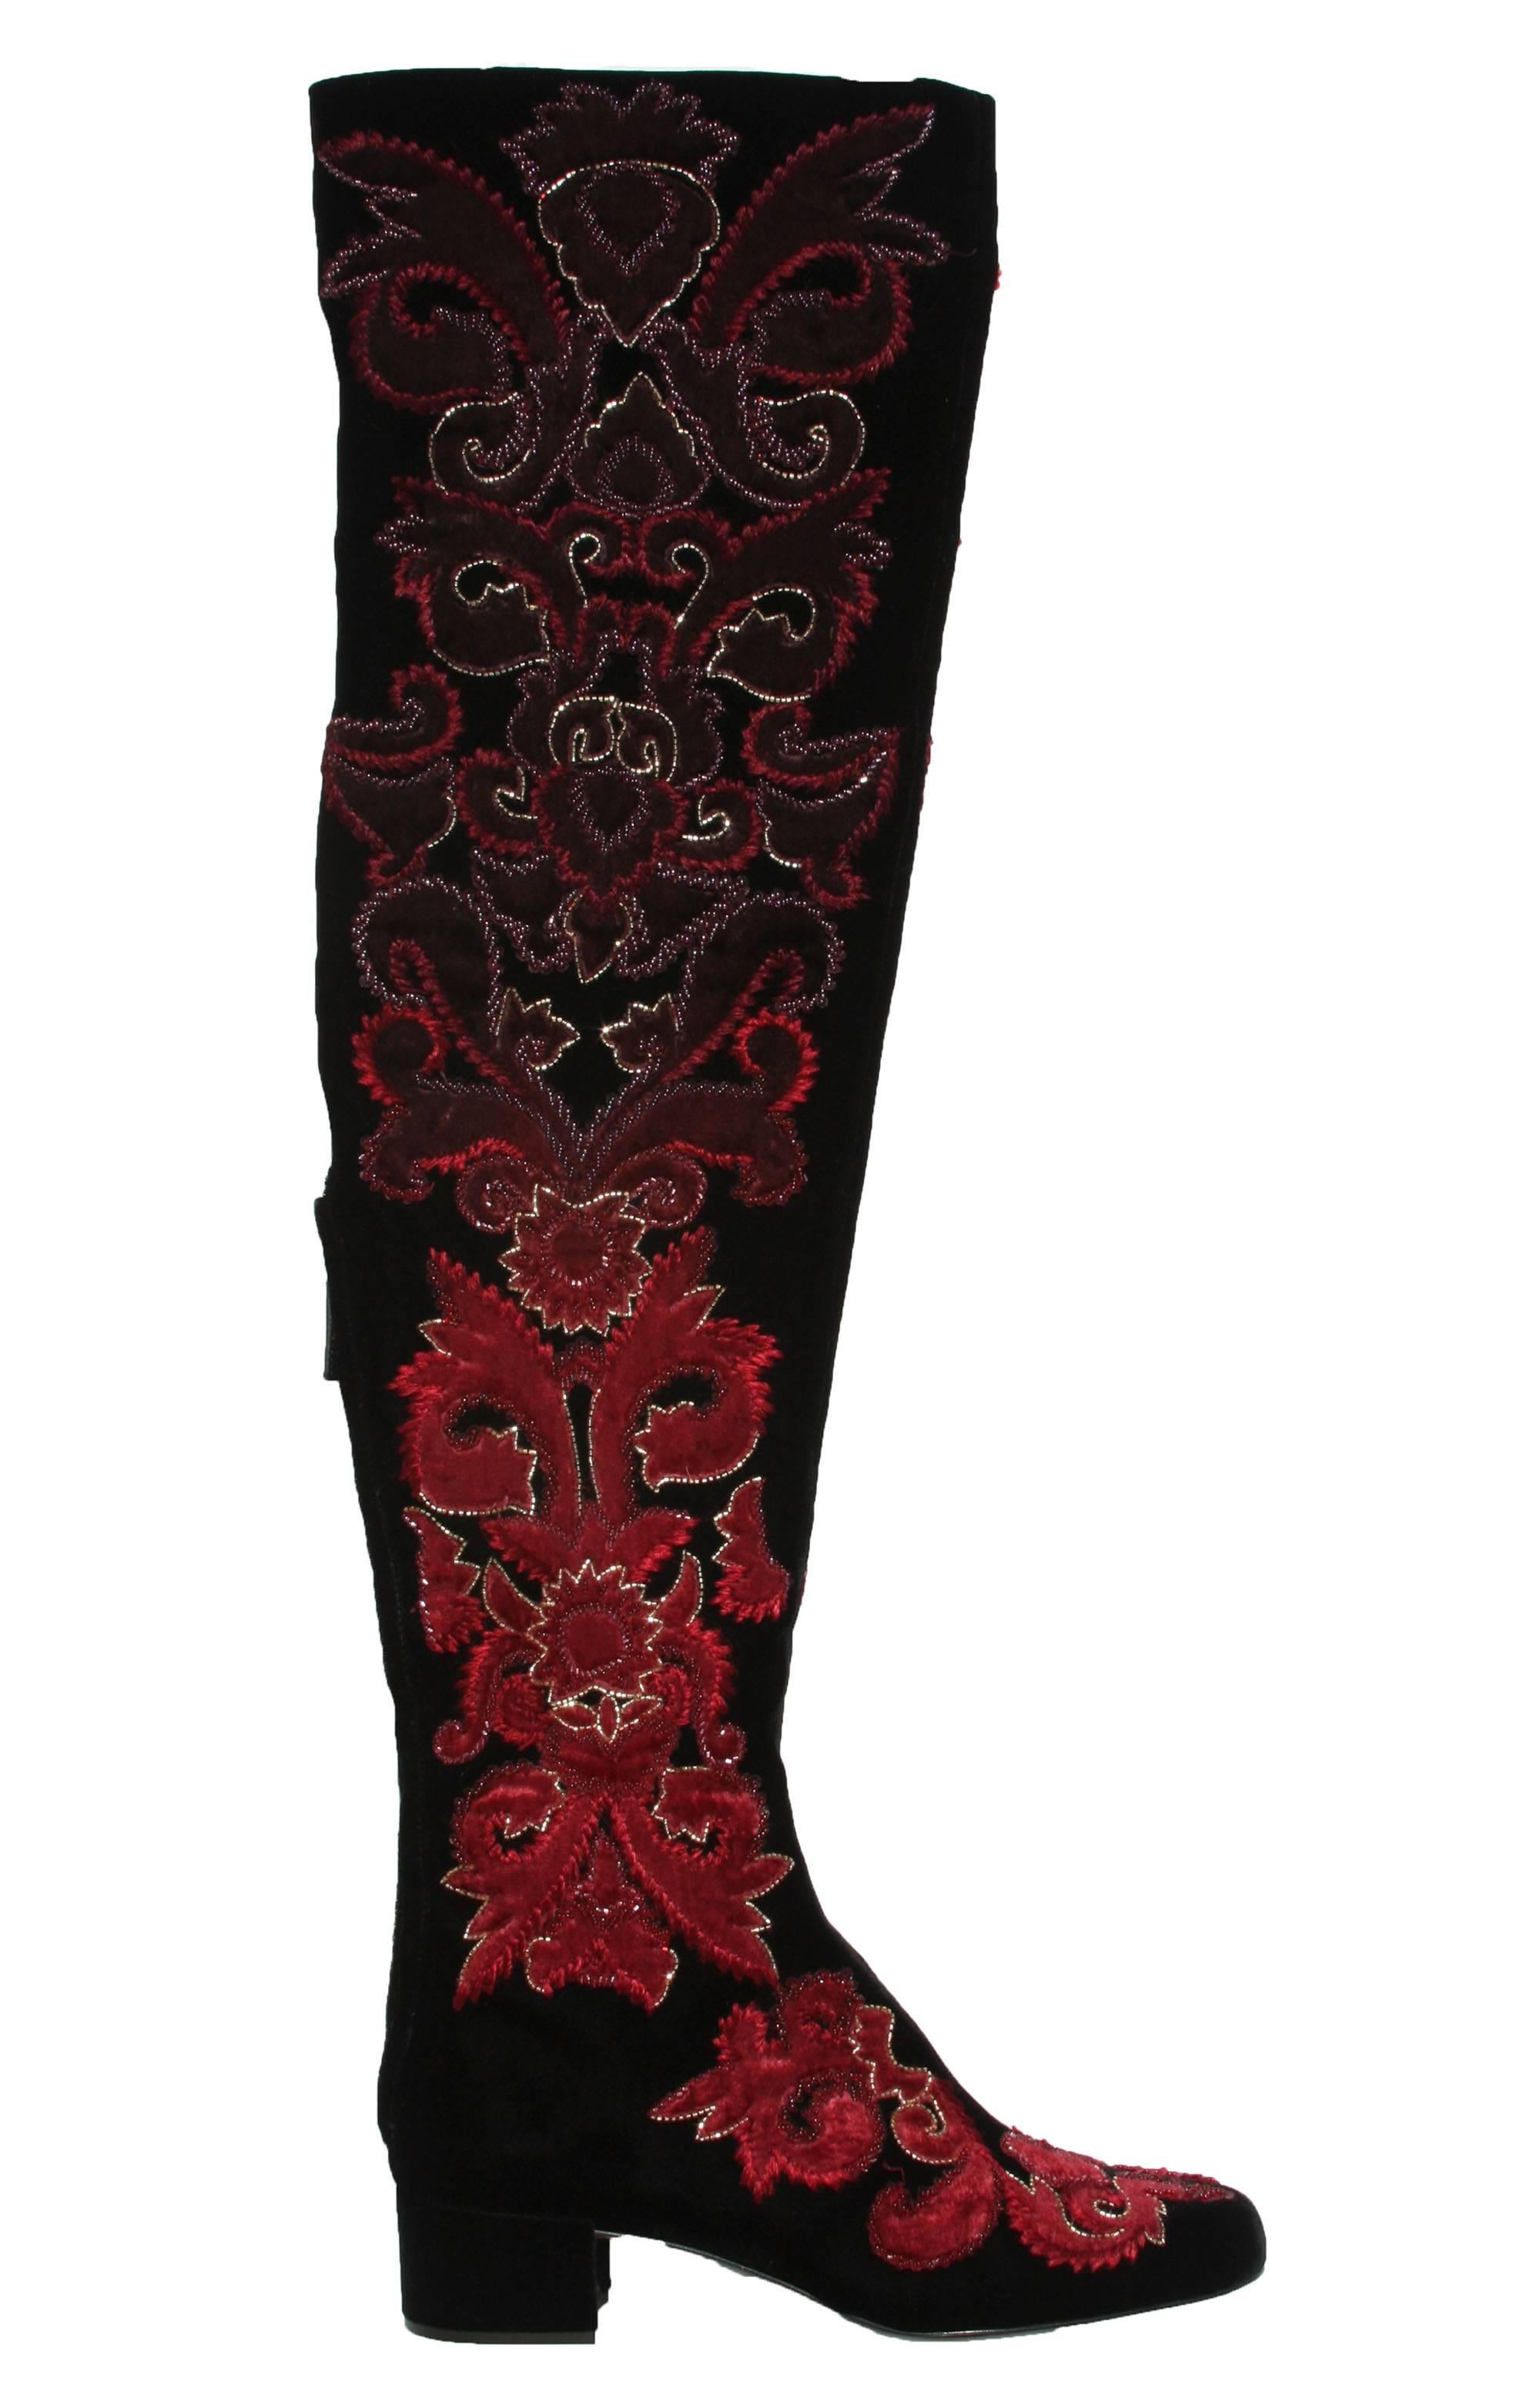 New Alberta Ferretti Runway Beaded Embroidered Thigh High Boots
Designer size 39 - US 9
Exquisite and Rich Beaded and Embroidered Thigh High Velvet with Burgundy, Gold and Brown Colors of Application.
Partly Back Zip, Leather Lining, Leather